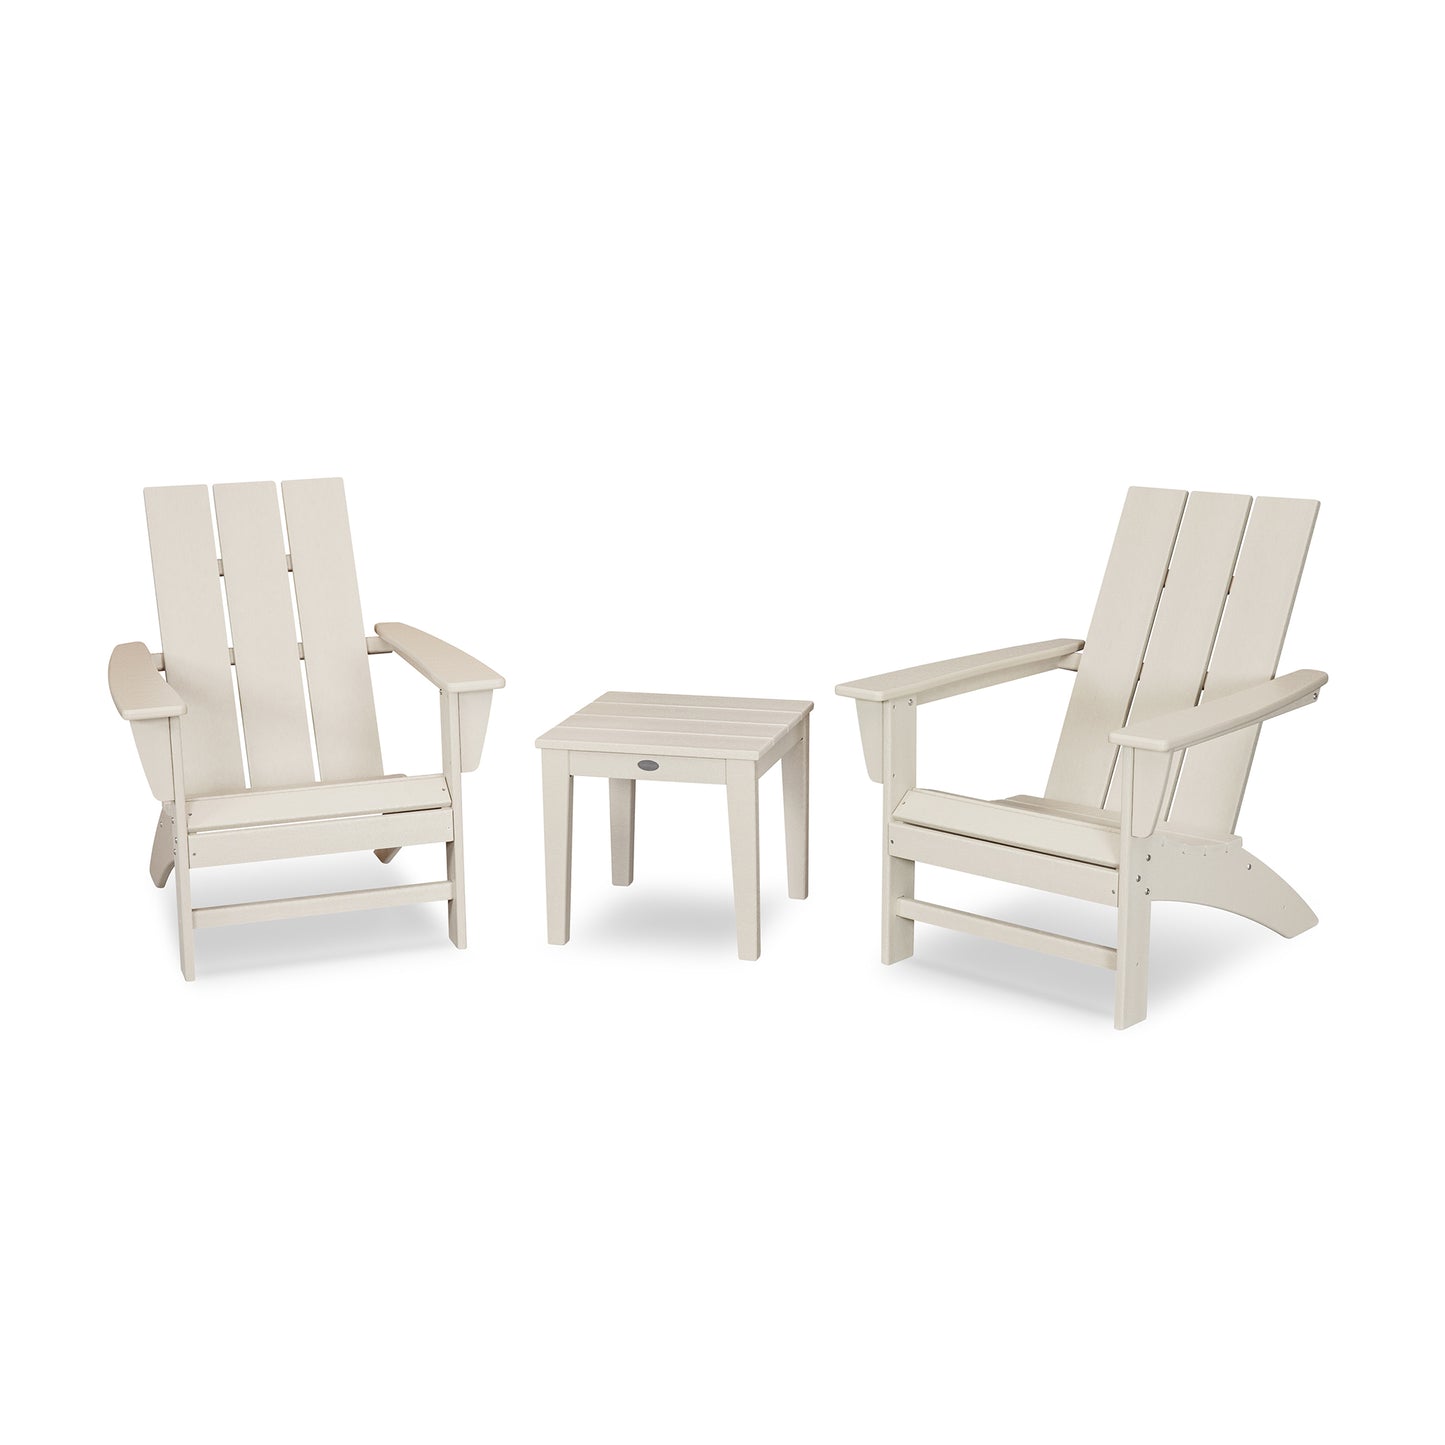 Two white POLYWOOD Modern Adirondack chairs with a matching side table, positioned on a plain white background. The furniture is crafted from POLYWOOD® lumber in a classic outdoor style.